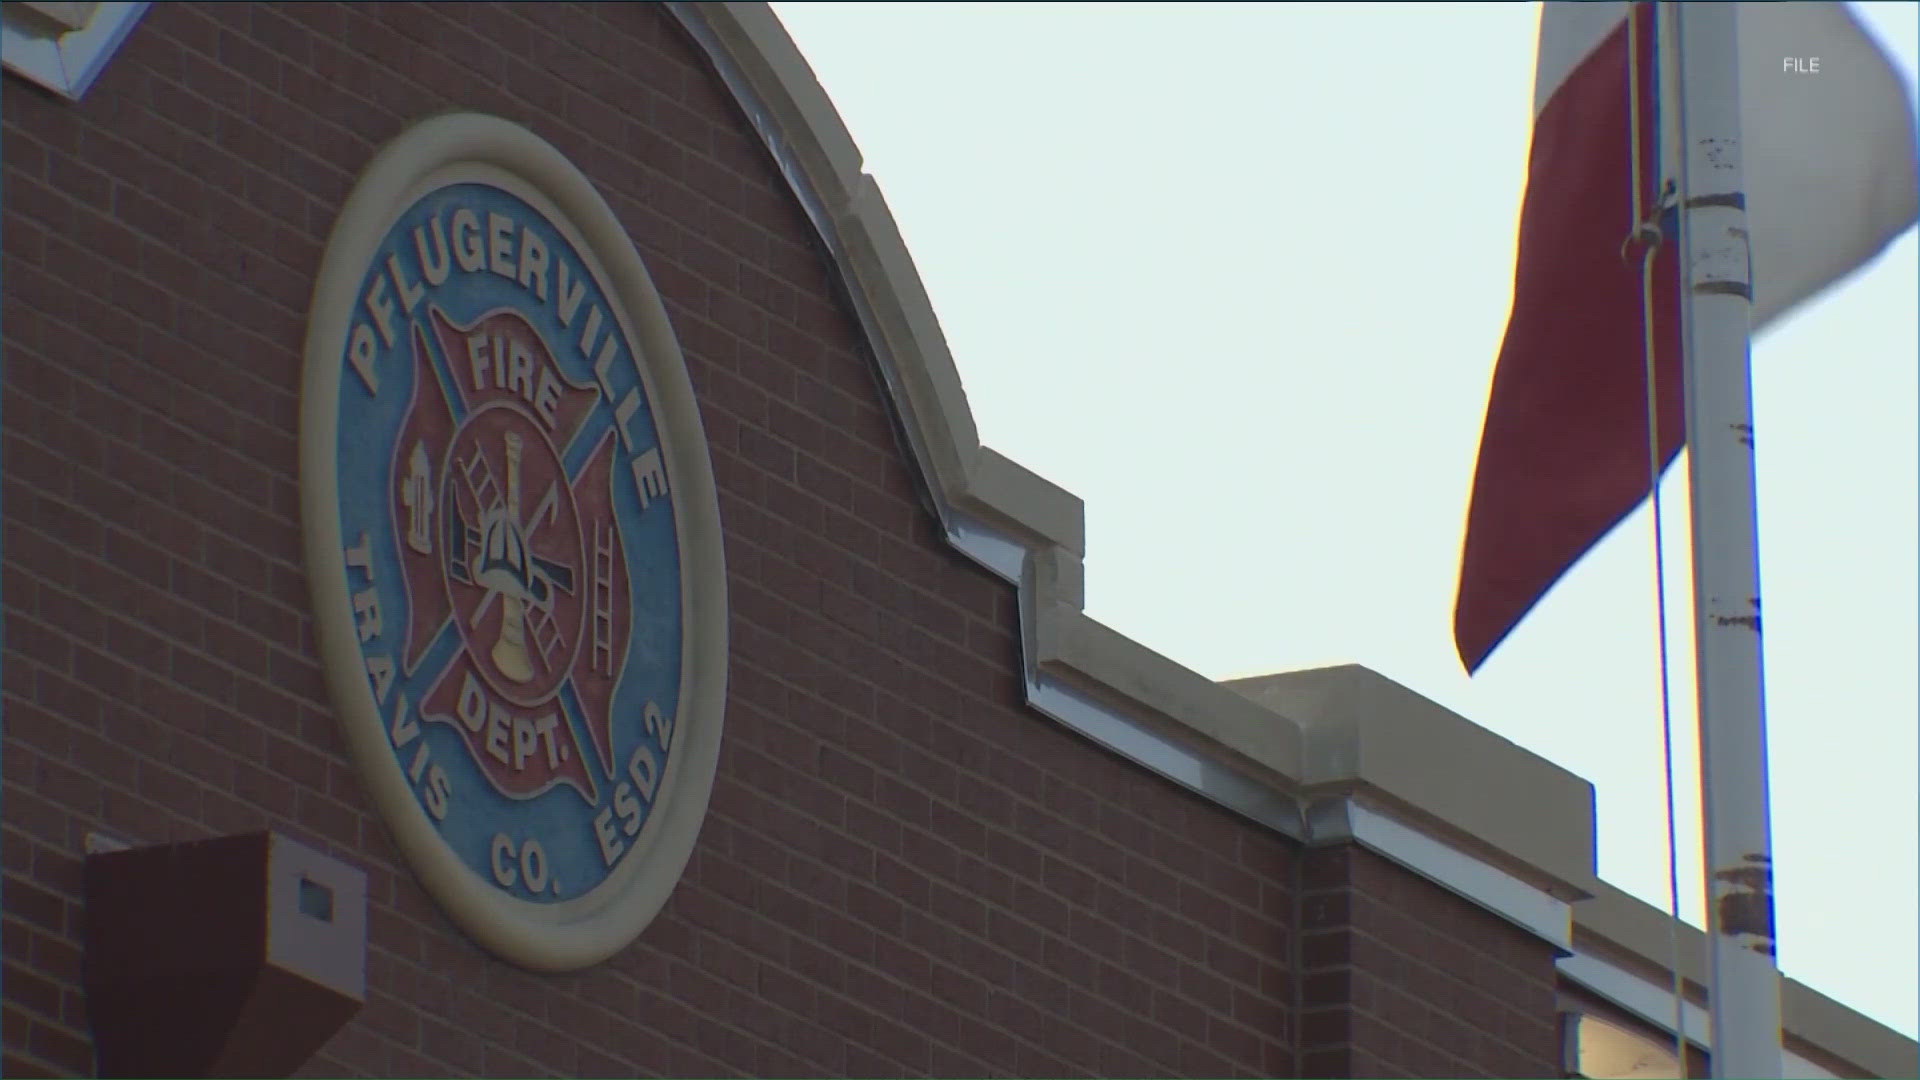 The city of Pflugerville is figuring out who will provide ambulance services to the city later this summer.